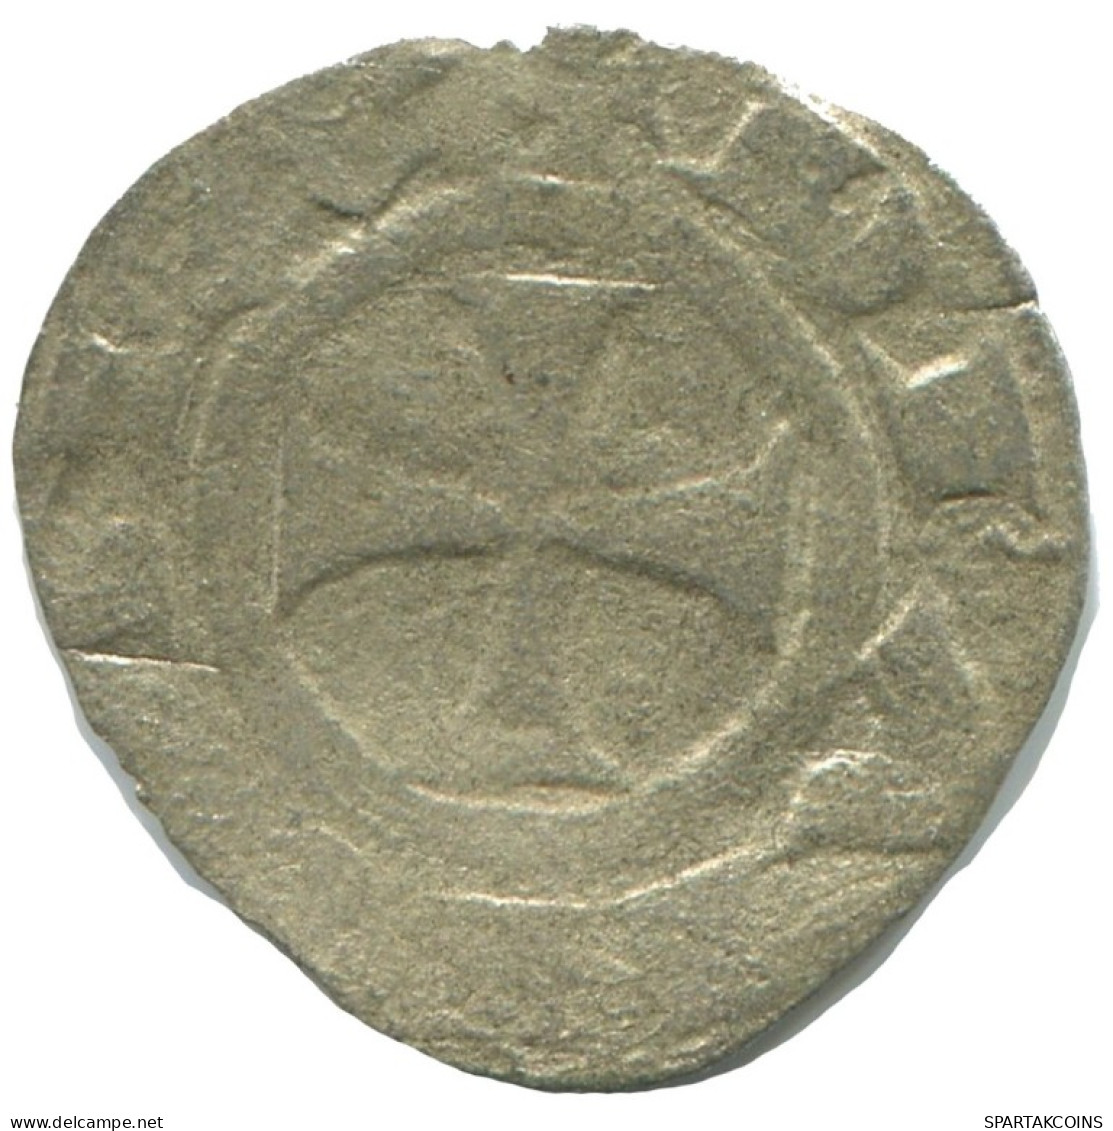 CRUSADER CROSS Authentic Original MEDIEVAL EUROPEAN Coin 0.4g/15mm #AC319.8.D.A - Andere - Europa